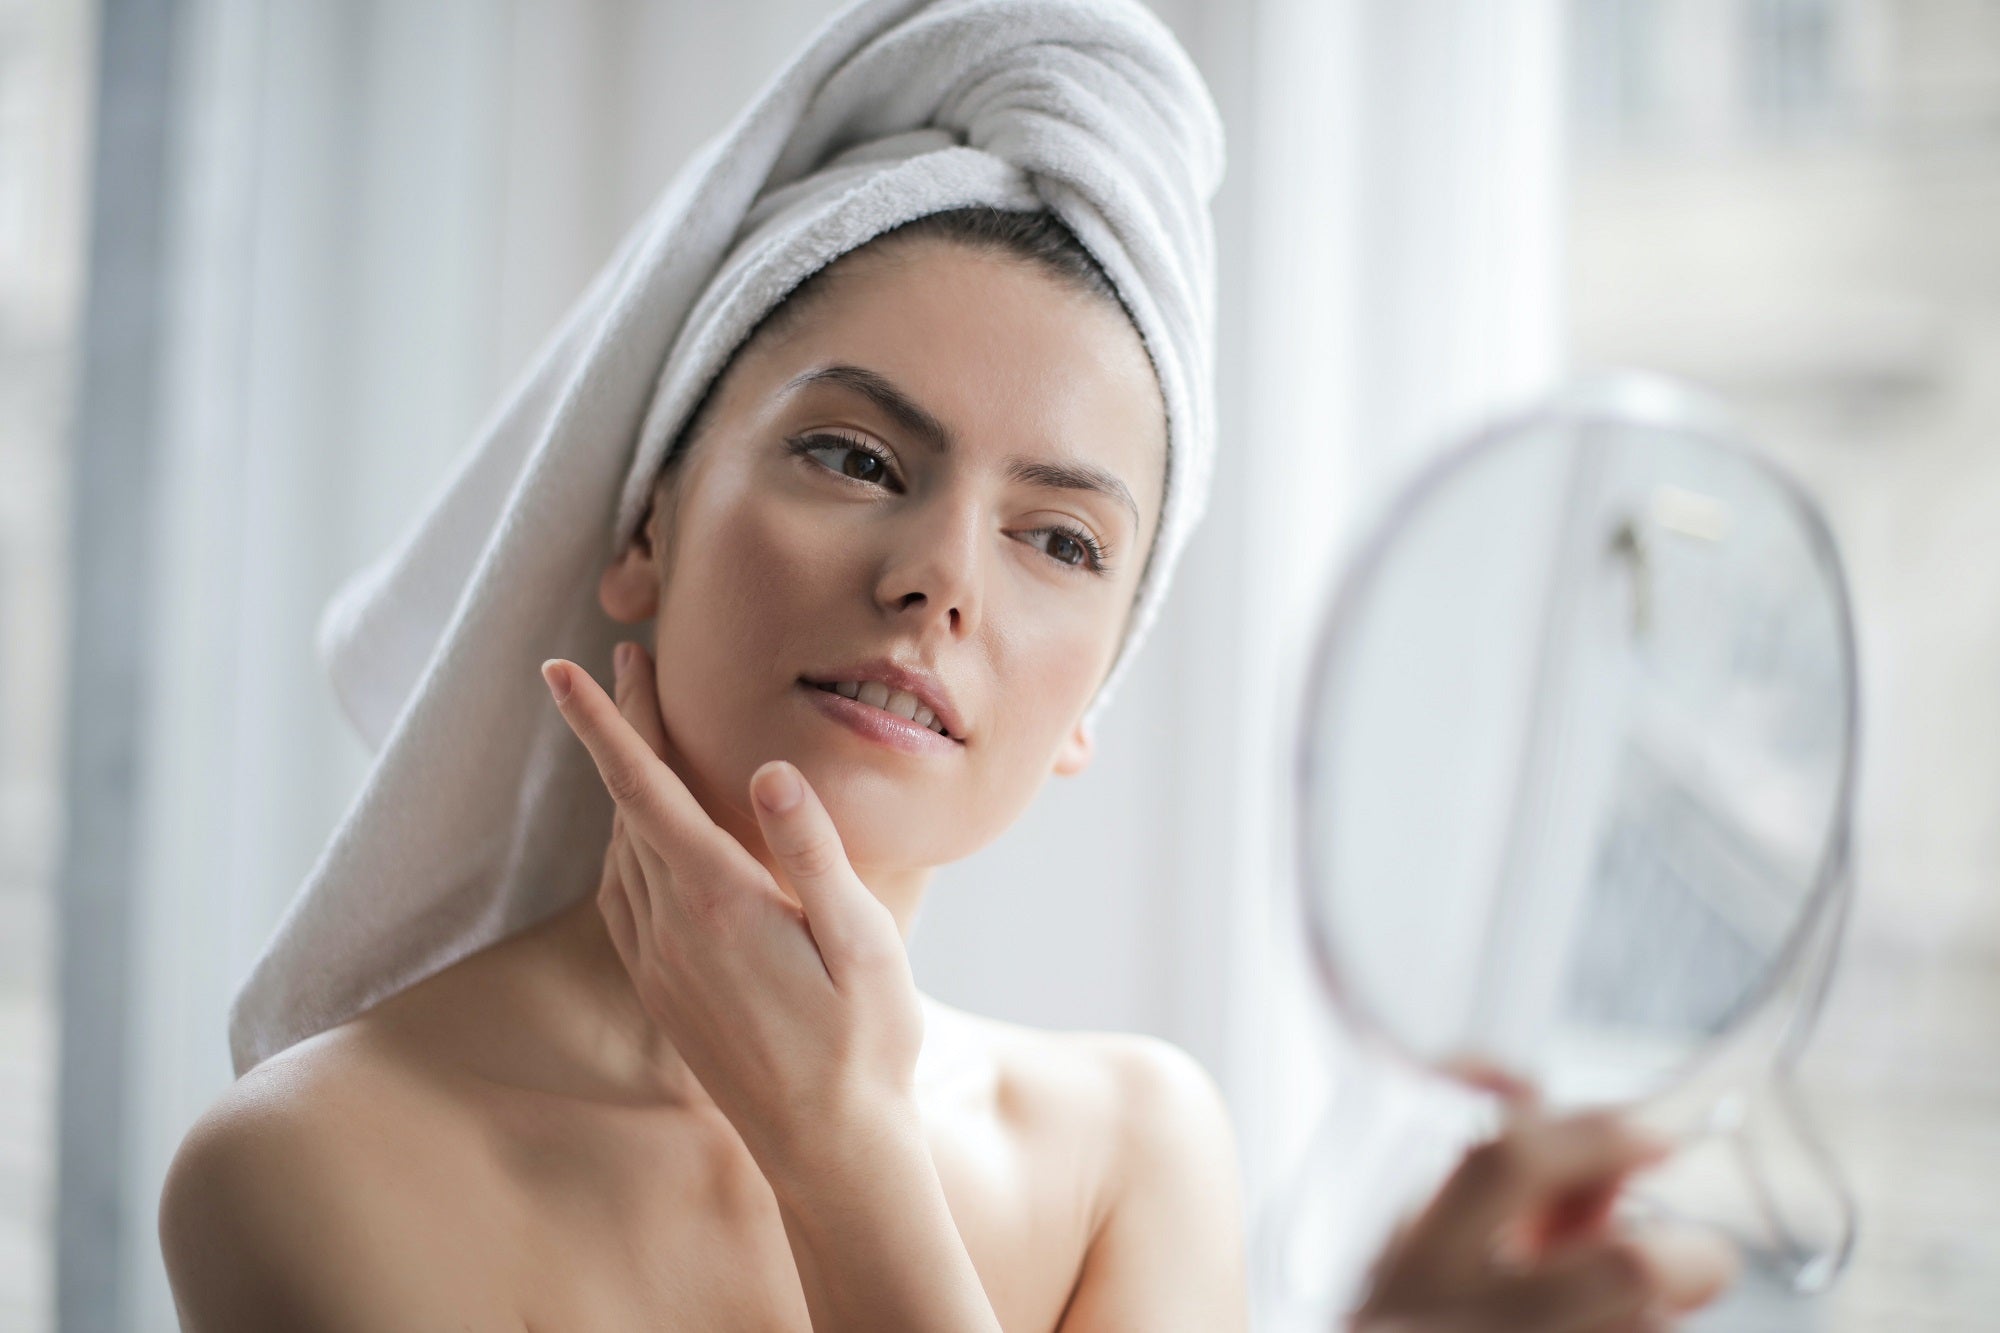 4 Ways to Tighten the Skin on Your Face